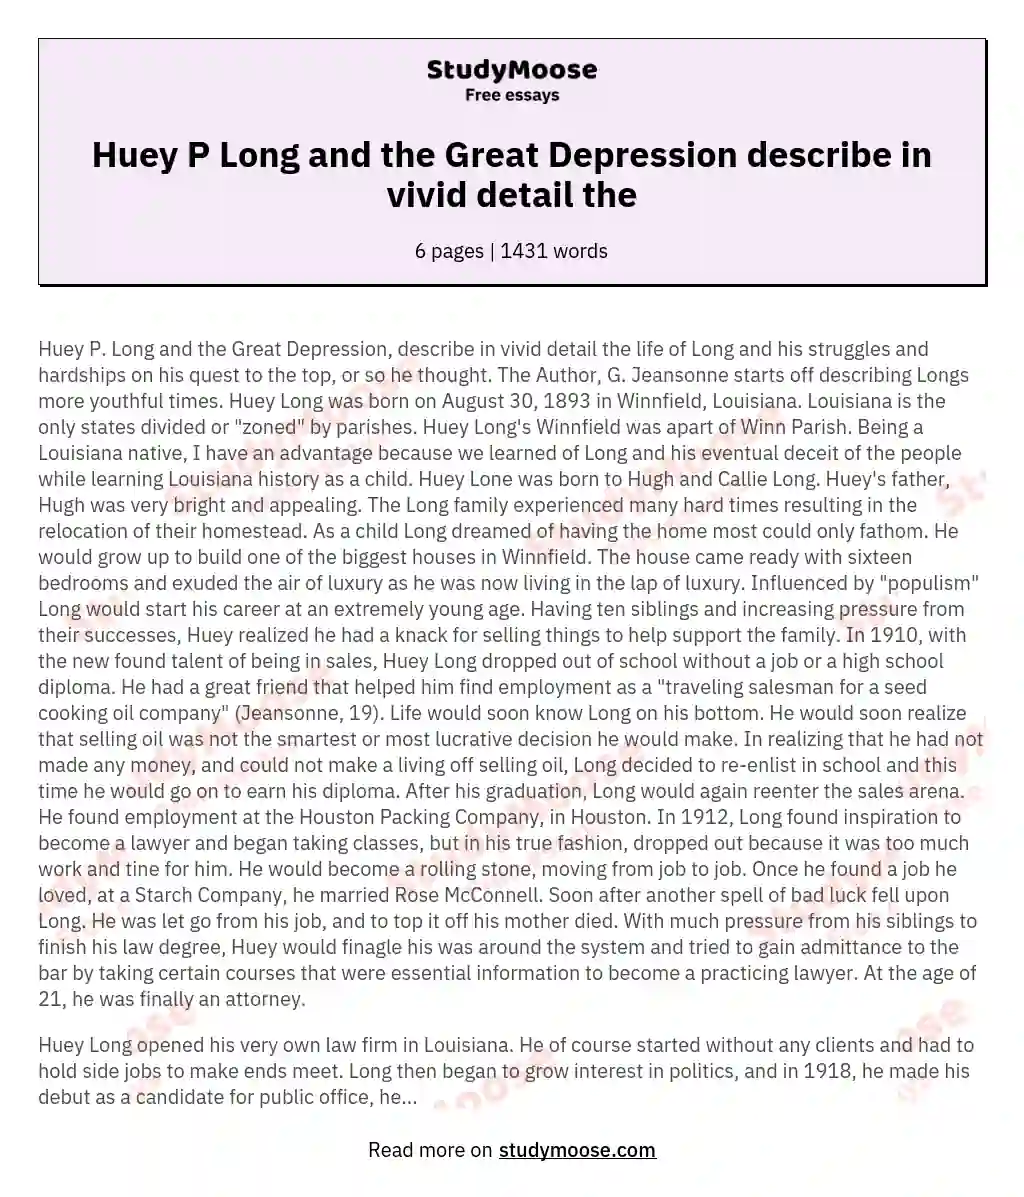 Huey P Long and the Great Depression describe in vivid detail the essay